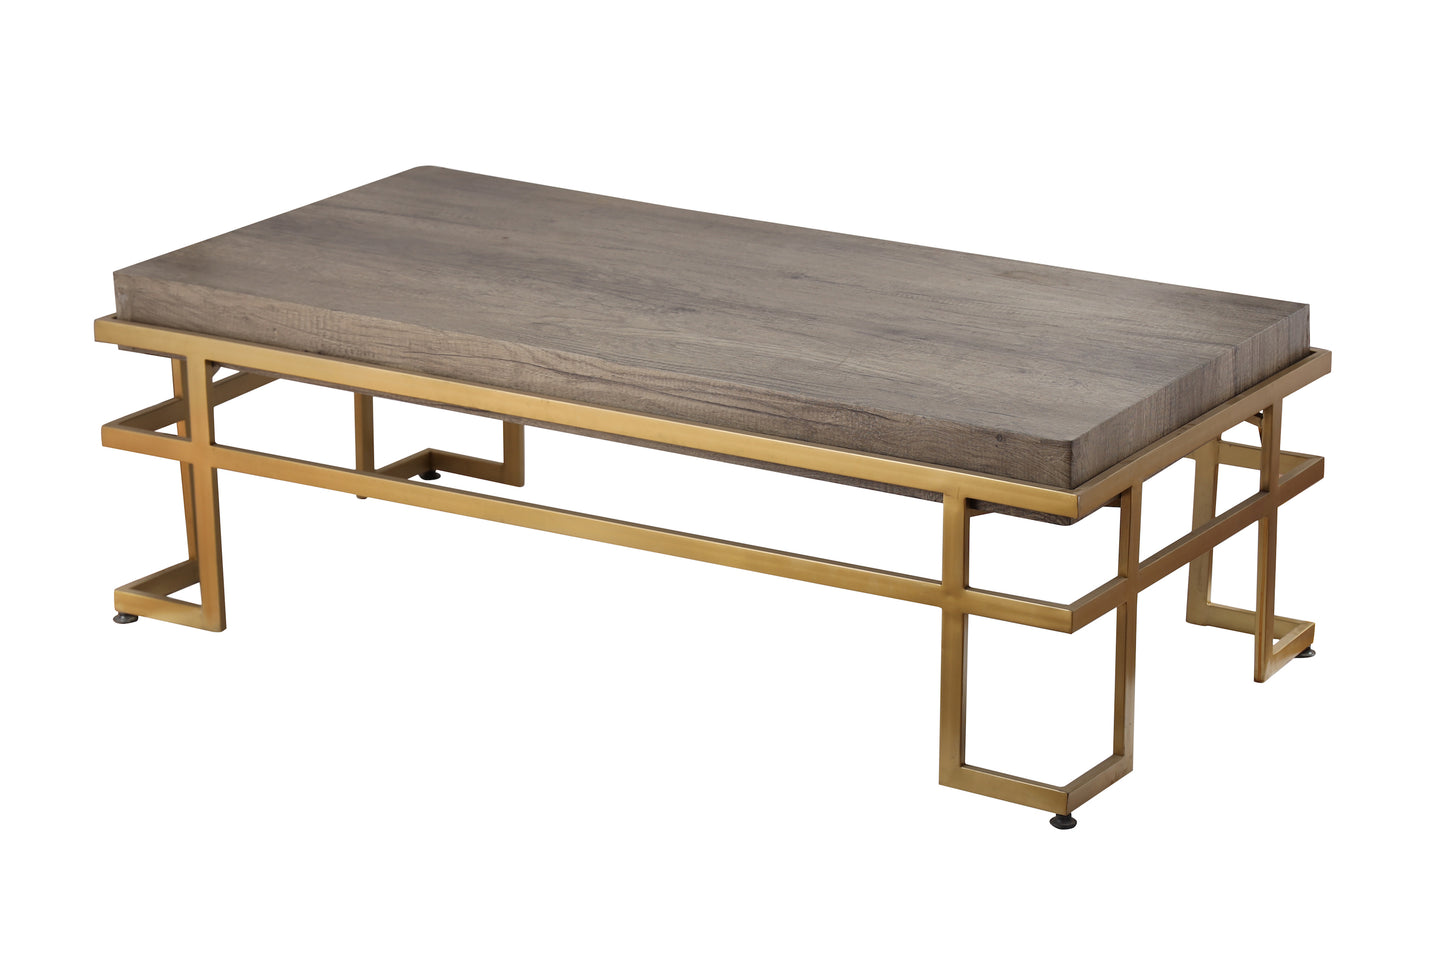 Large Centre table for living room|Gold & wood color